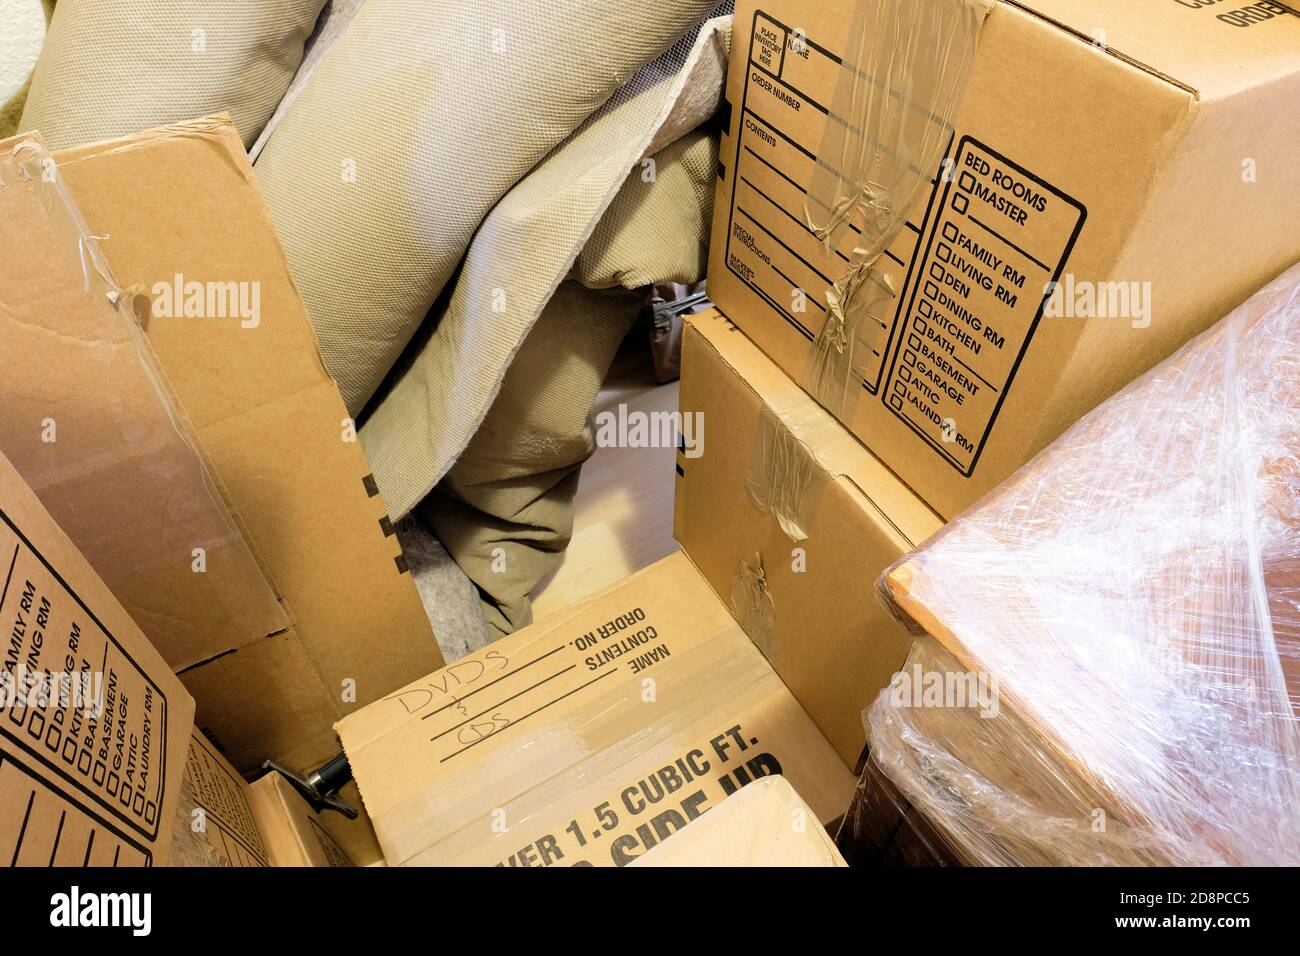 https://c8.alamy.com/comp/2D8PCC5/moving-cardboard-boxes-with-printed-list-of-items-for-each-room-bed-room-family-den-dining-kitchen-bath-basement-garage-attic-laundry-room-2D8PCC5.jpg